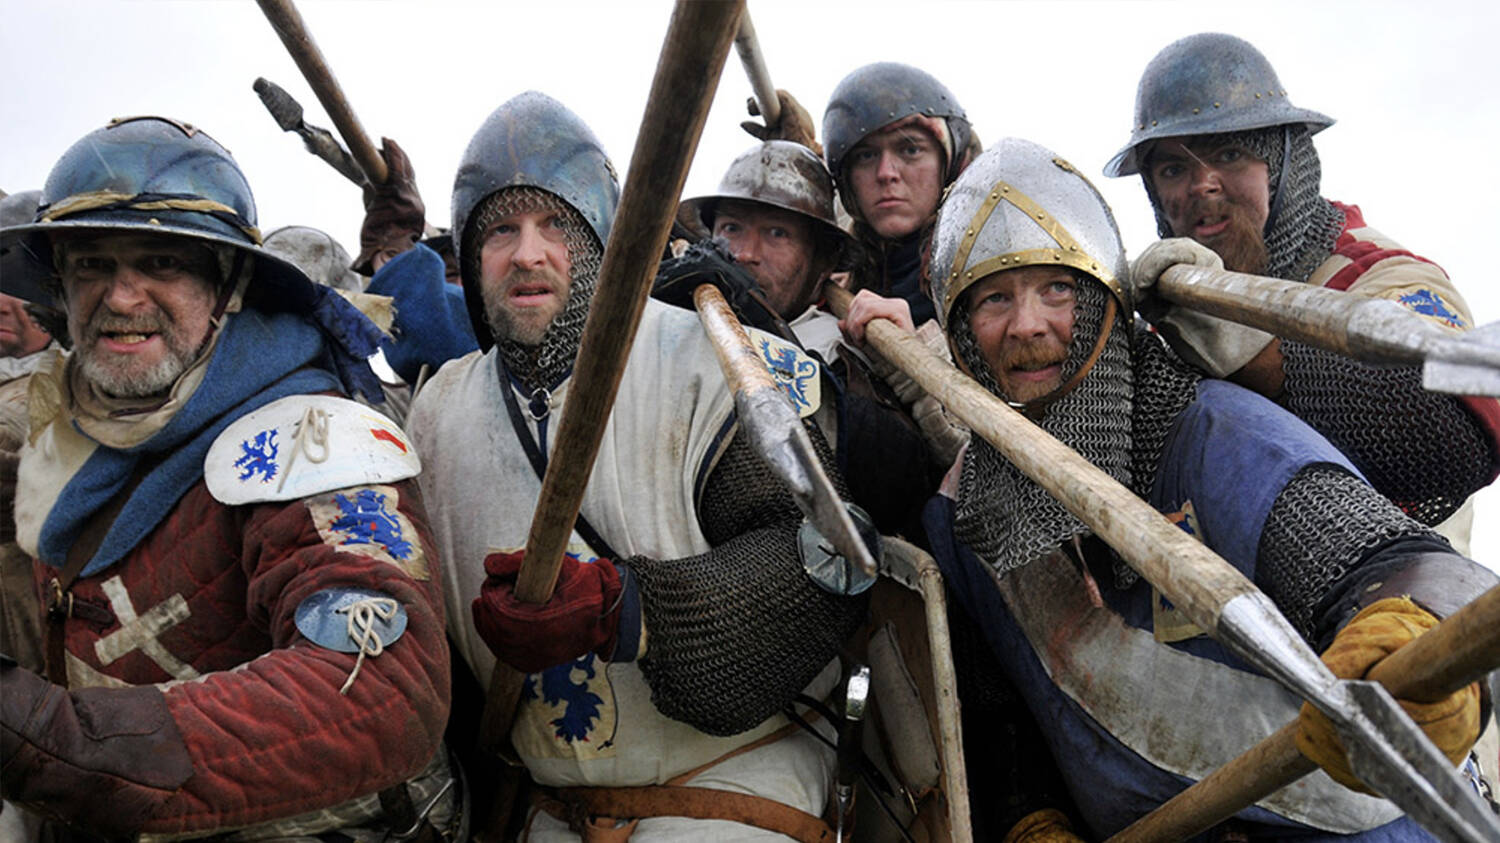 A Living History re-creation of a group of solders fighting in the Battle of Bannockburn. They are wearing helmets and chest armour, and huddle together, brandishing spears and shields.